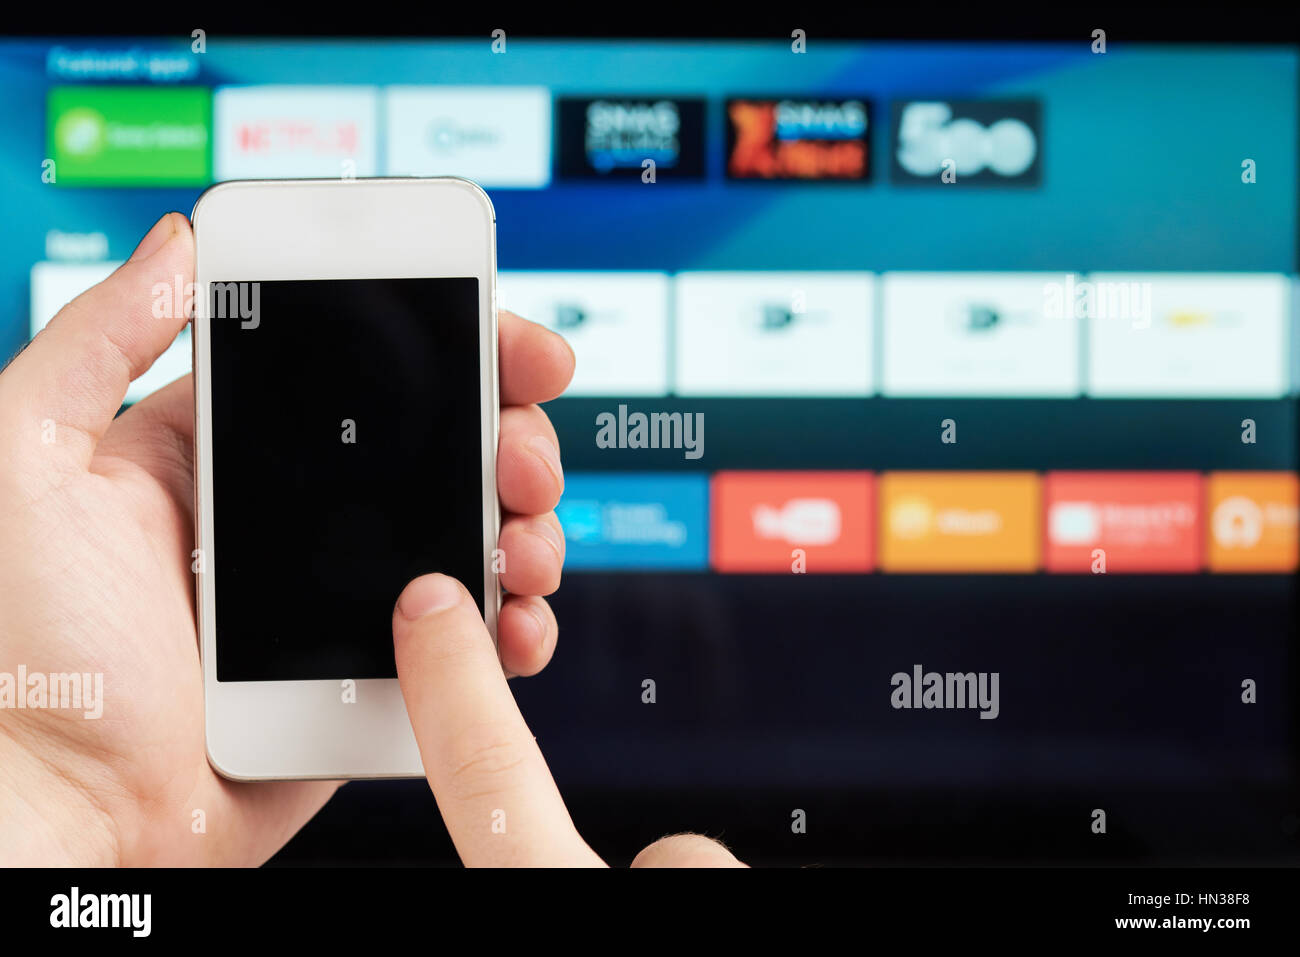 using smartphone as tv remote control on blurred background Stock Photo